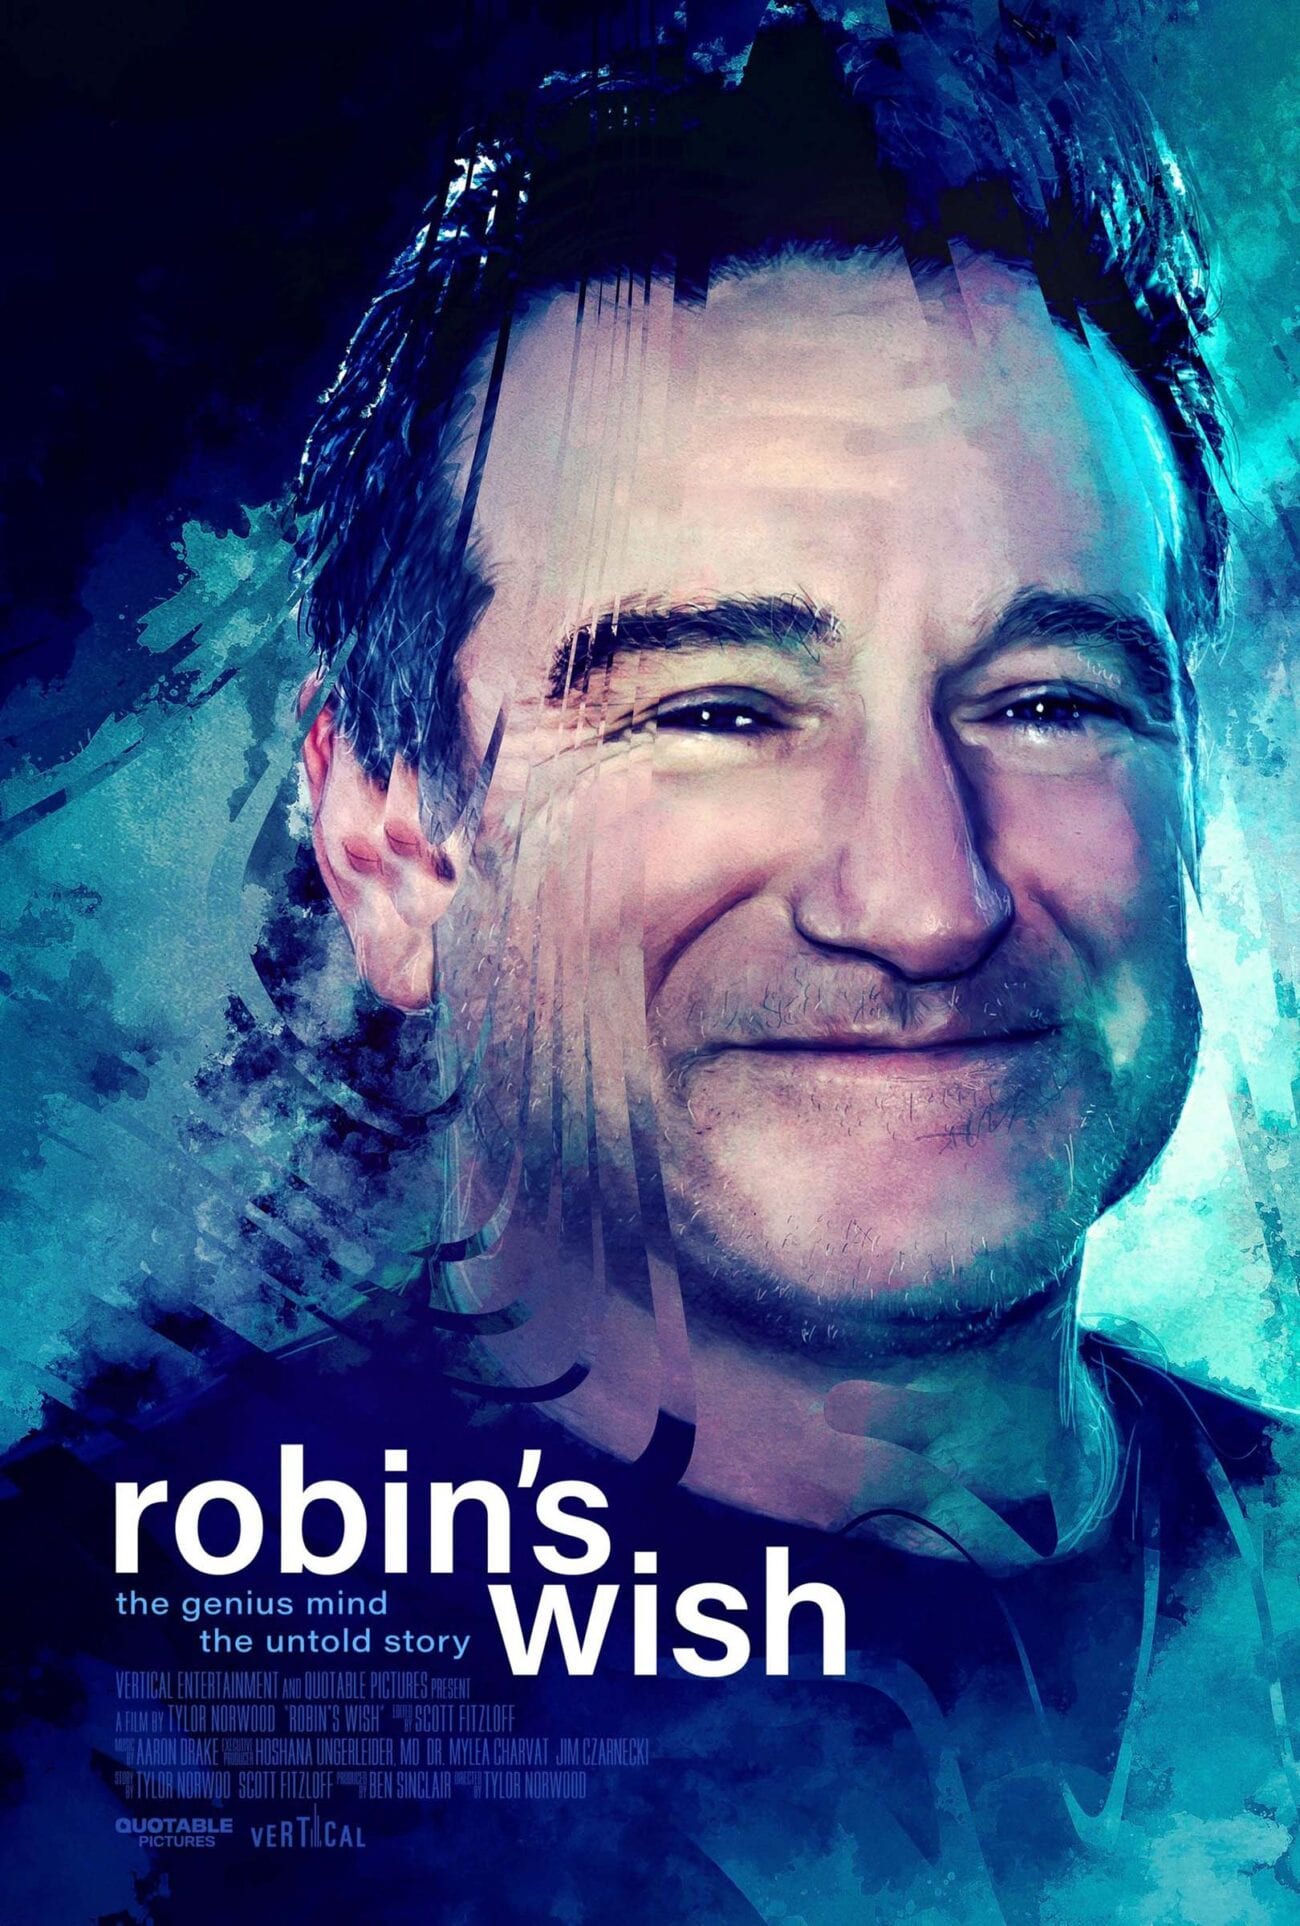 It's been six years since Robin Williams' tragic death, but the new documentary 'Robin's Wish' shines a closer light on the final days of the star.